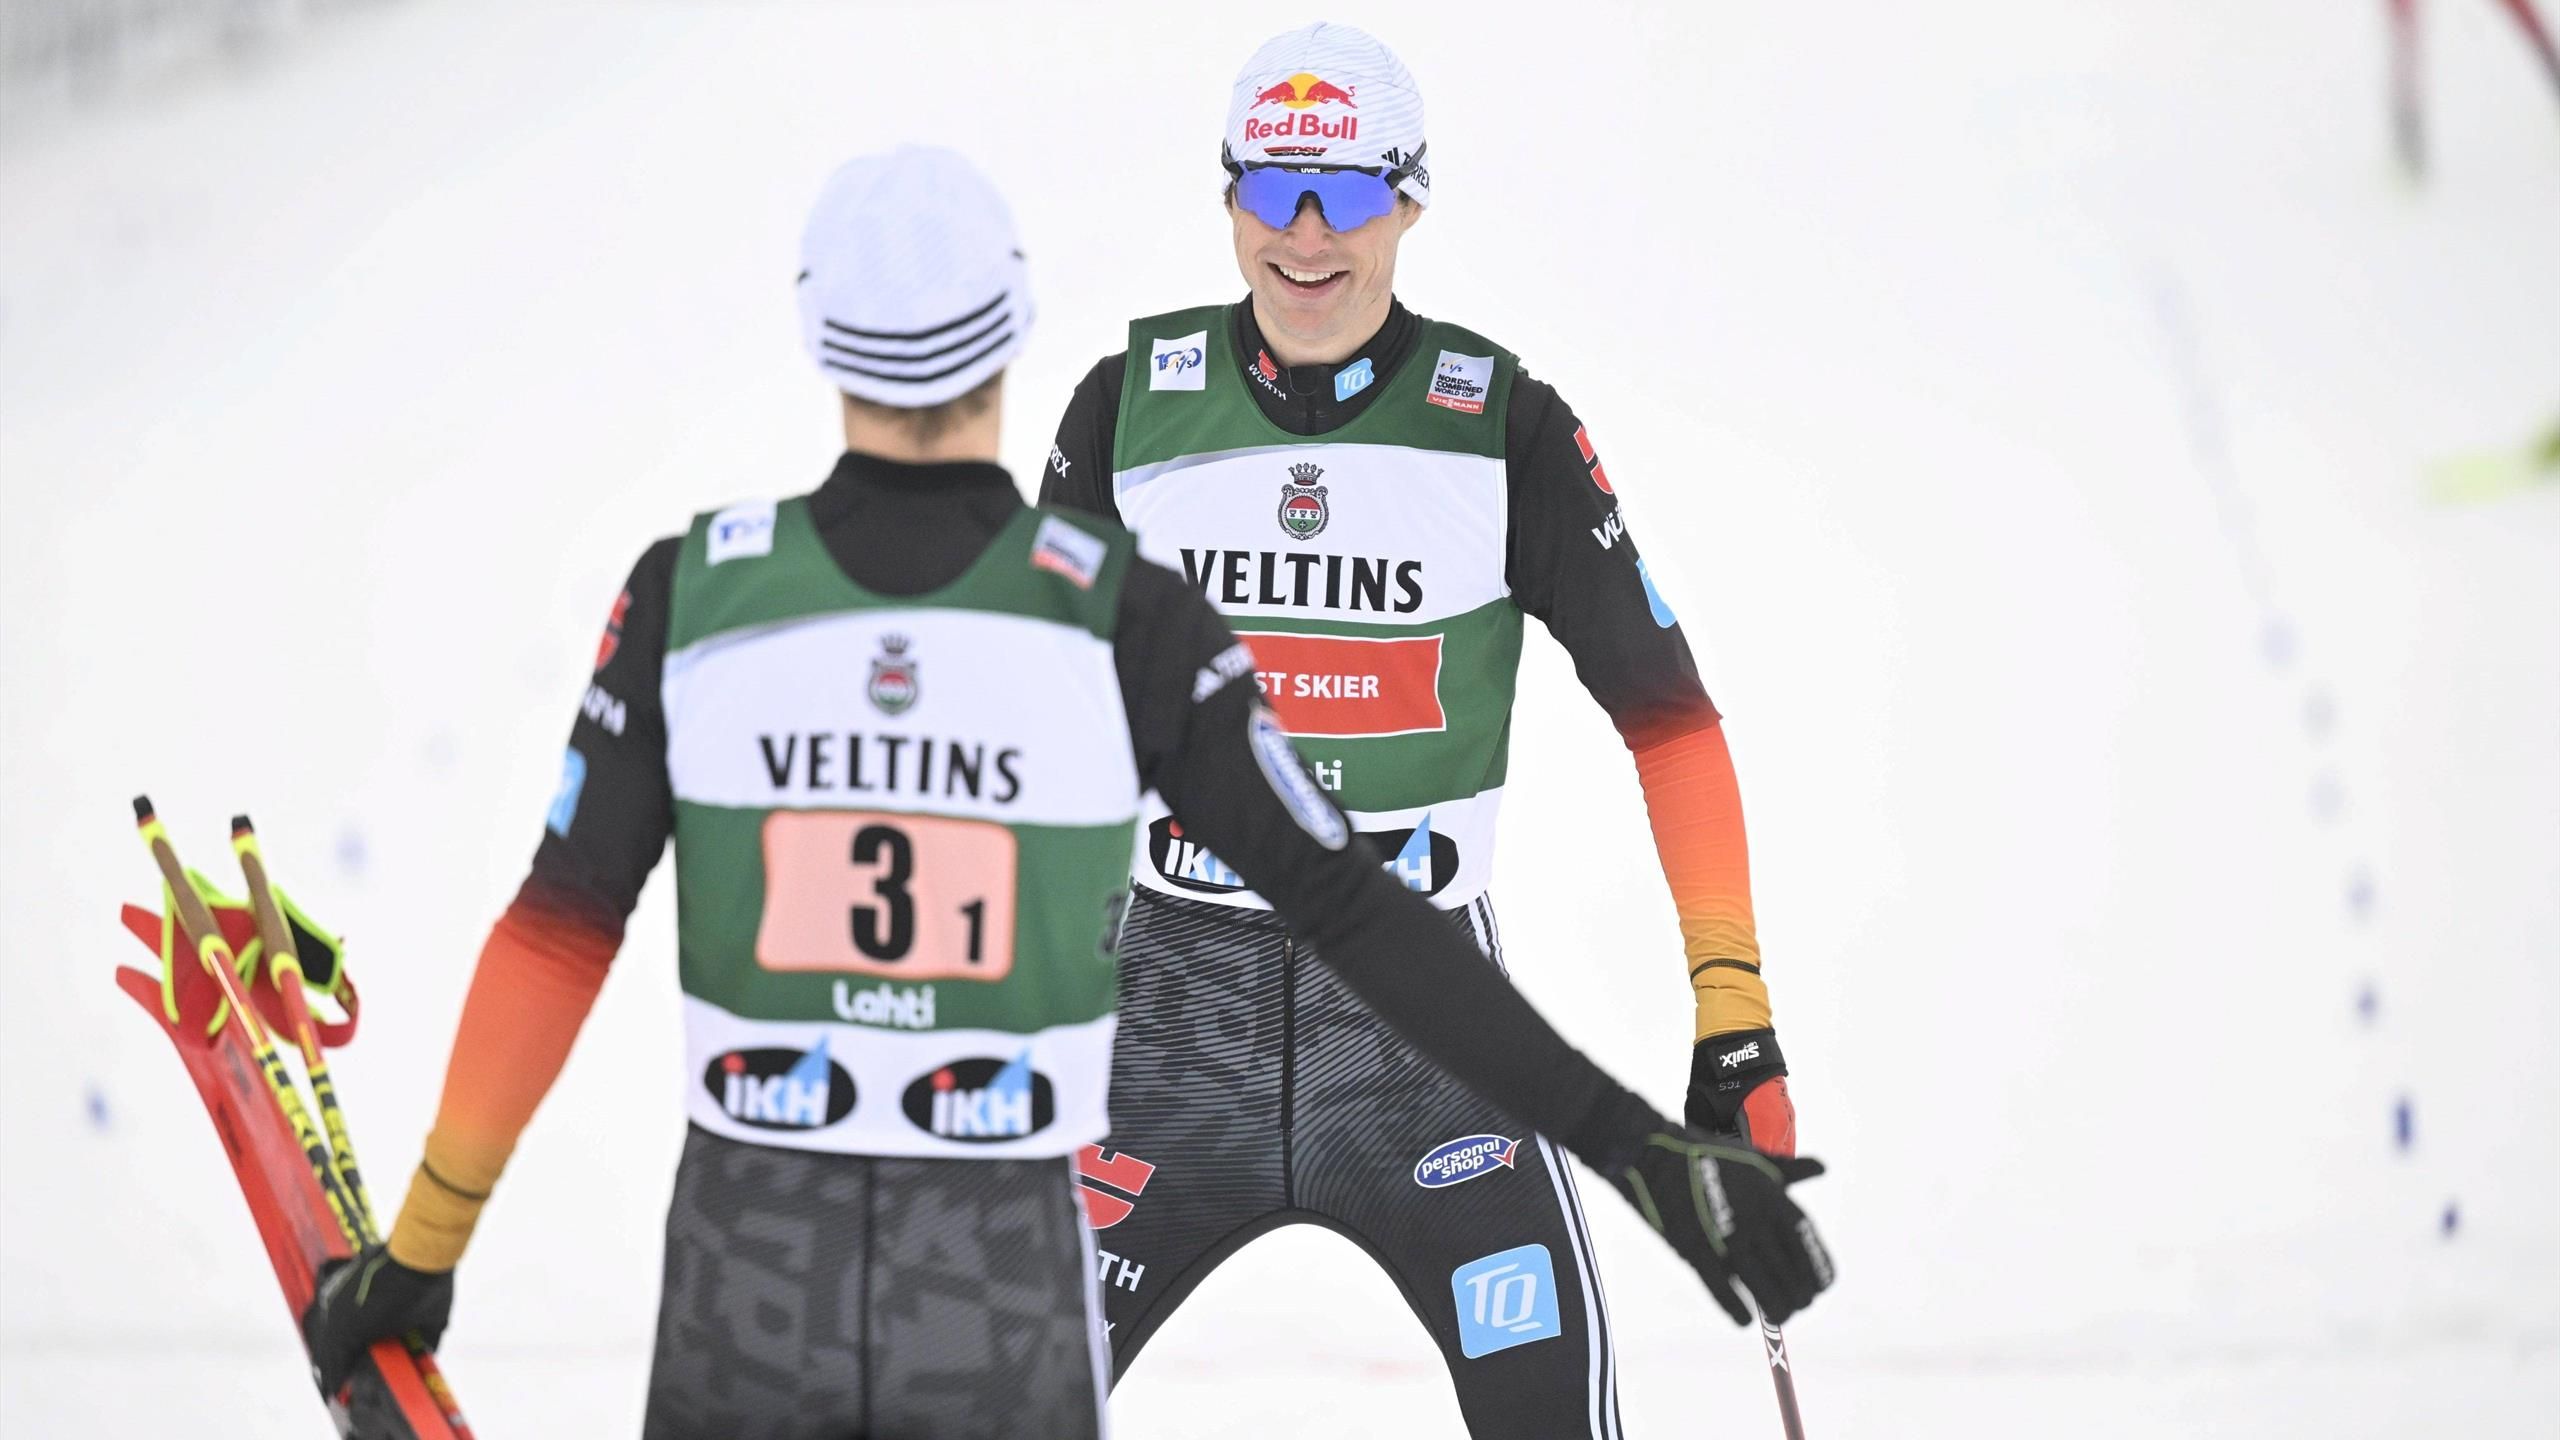 Lahti: Vinzenz Geiger and Manuel Feist miss out on victory – Julian Schmid and Terence Weber breakdown